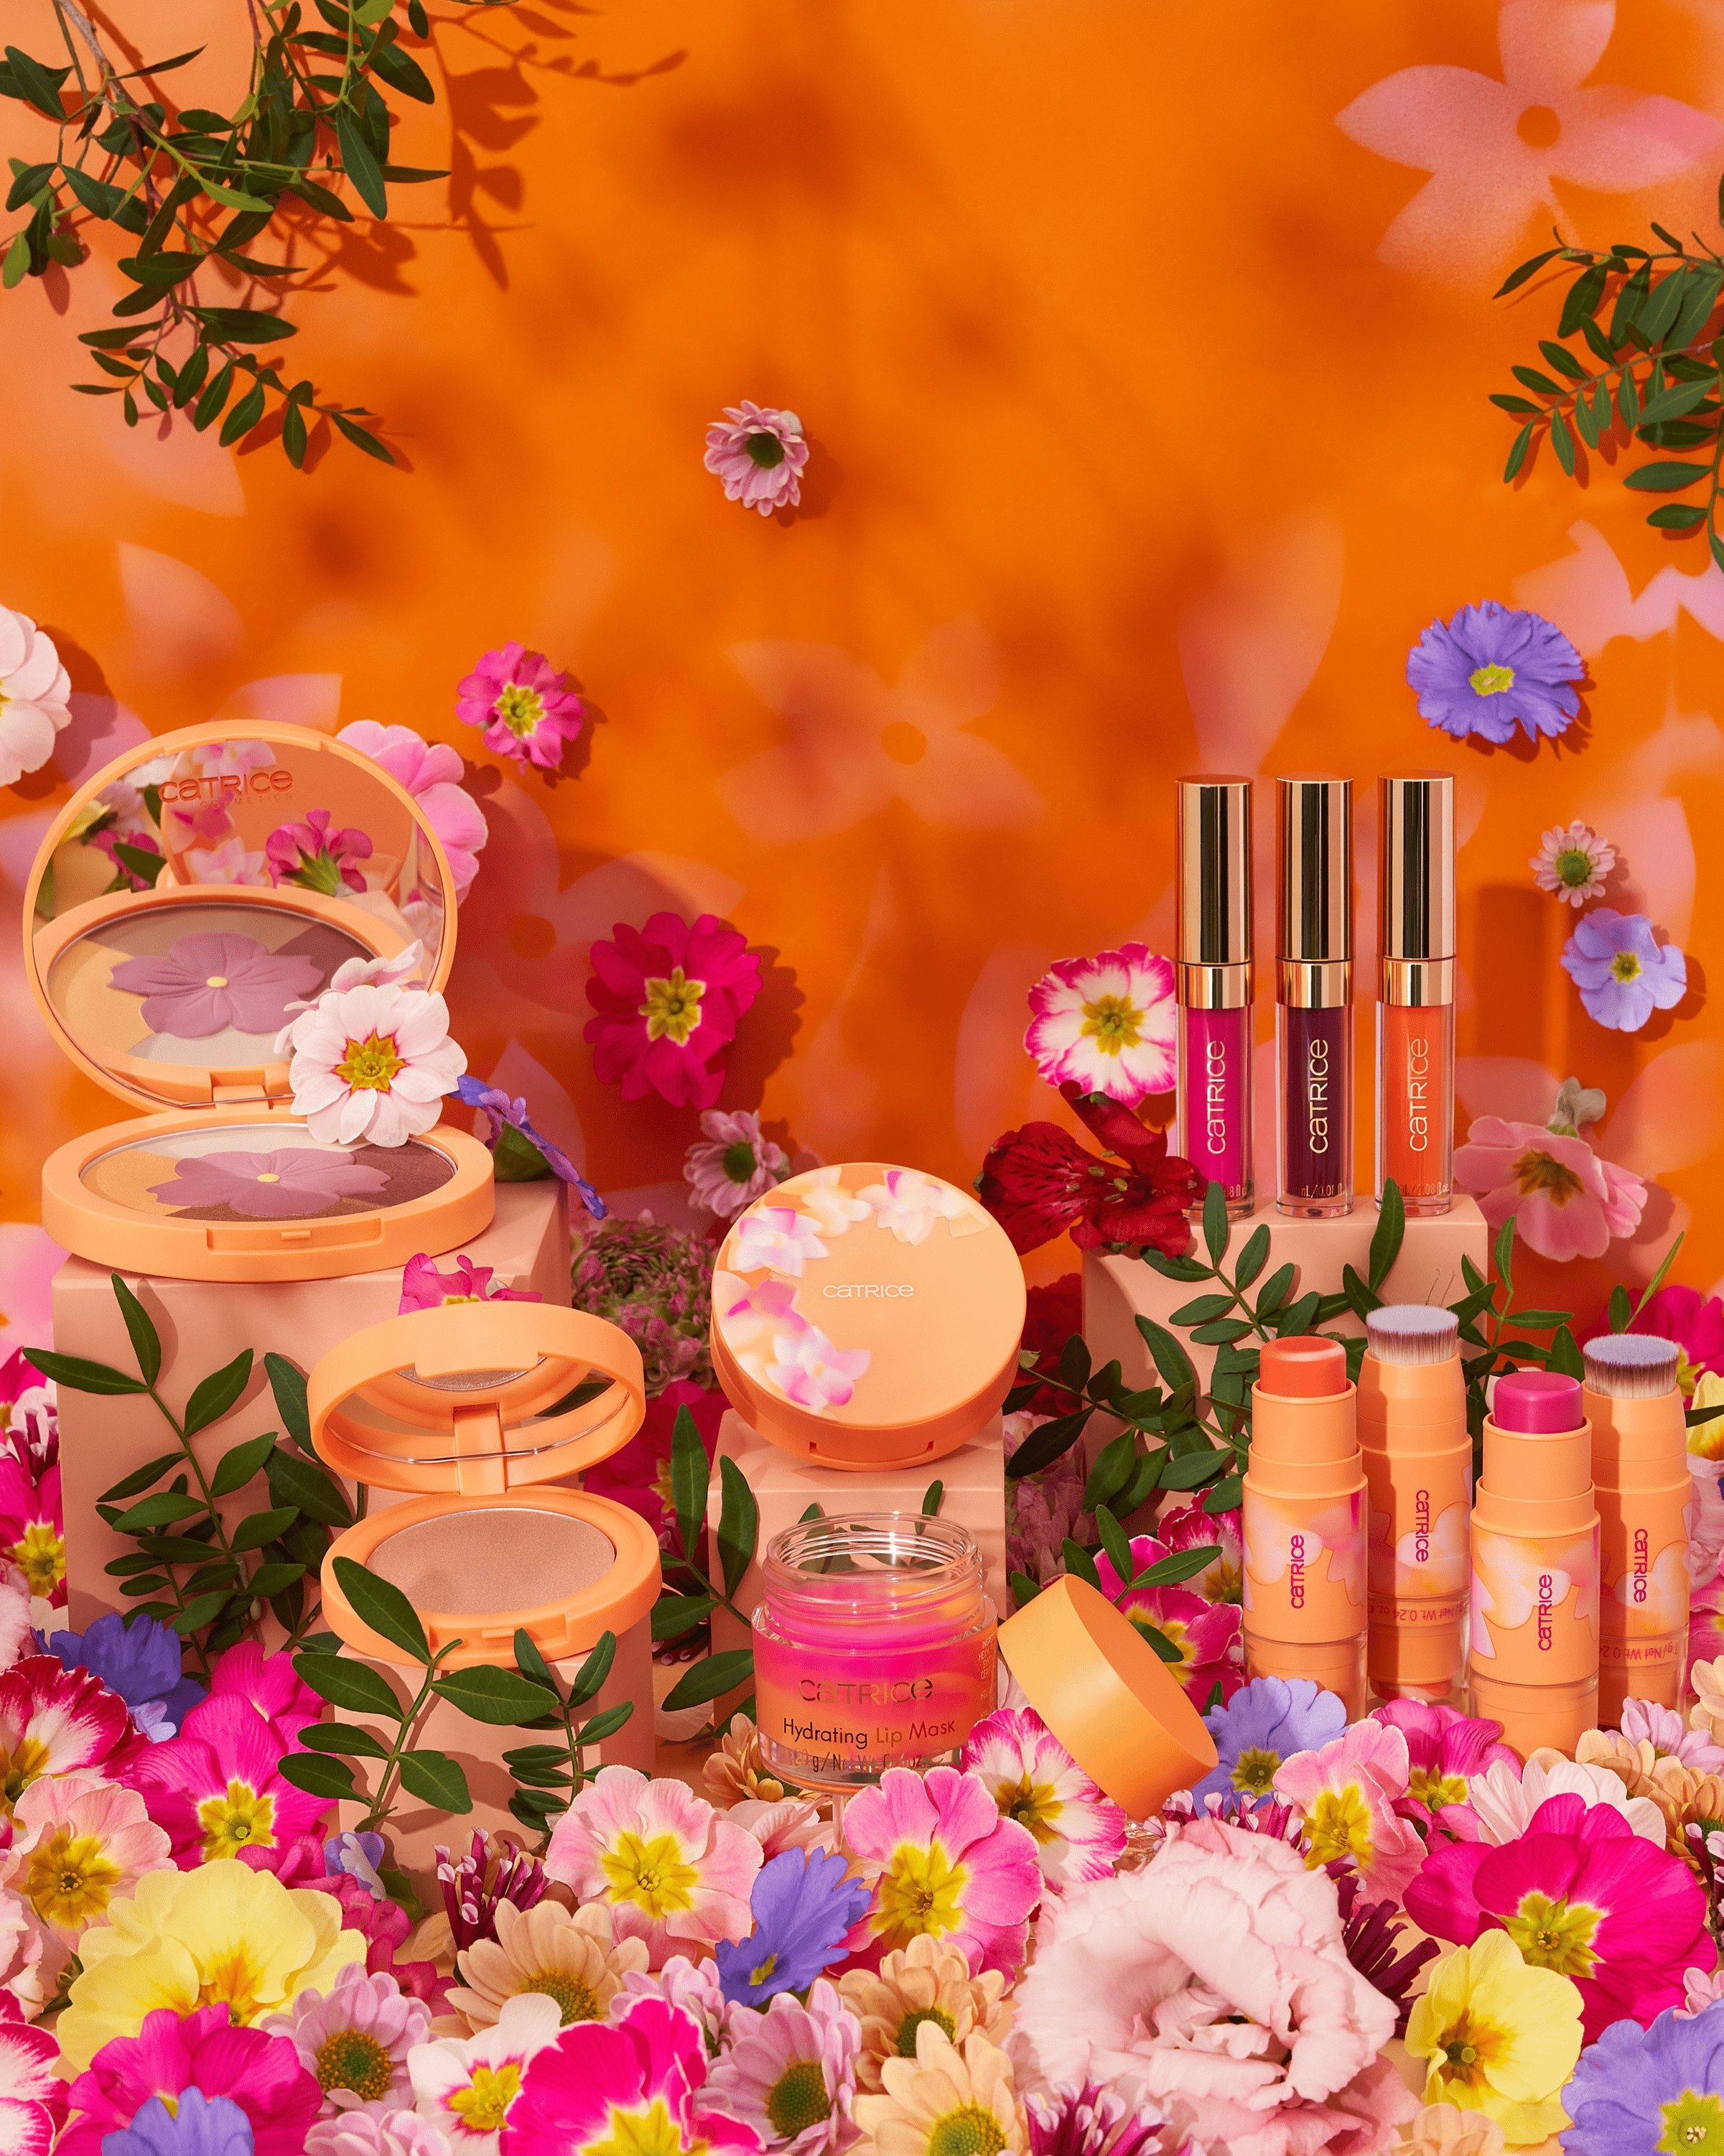 Catrice Seeking Flowers Limited Edition Product Mix